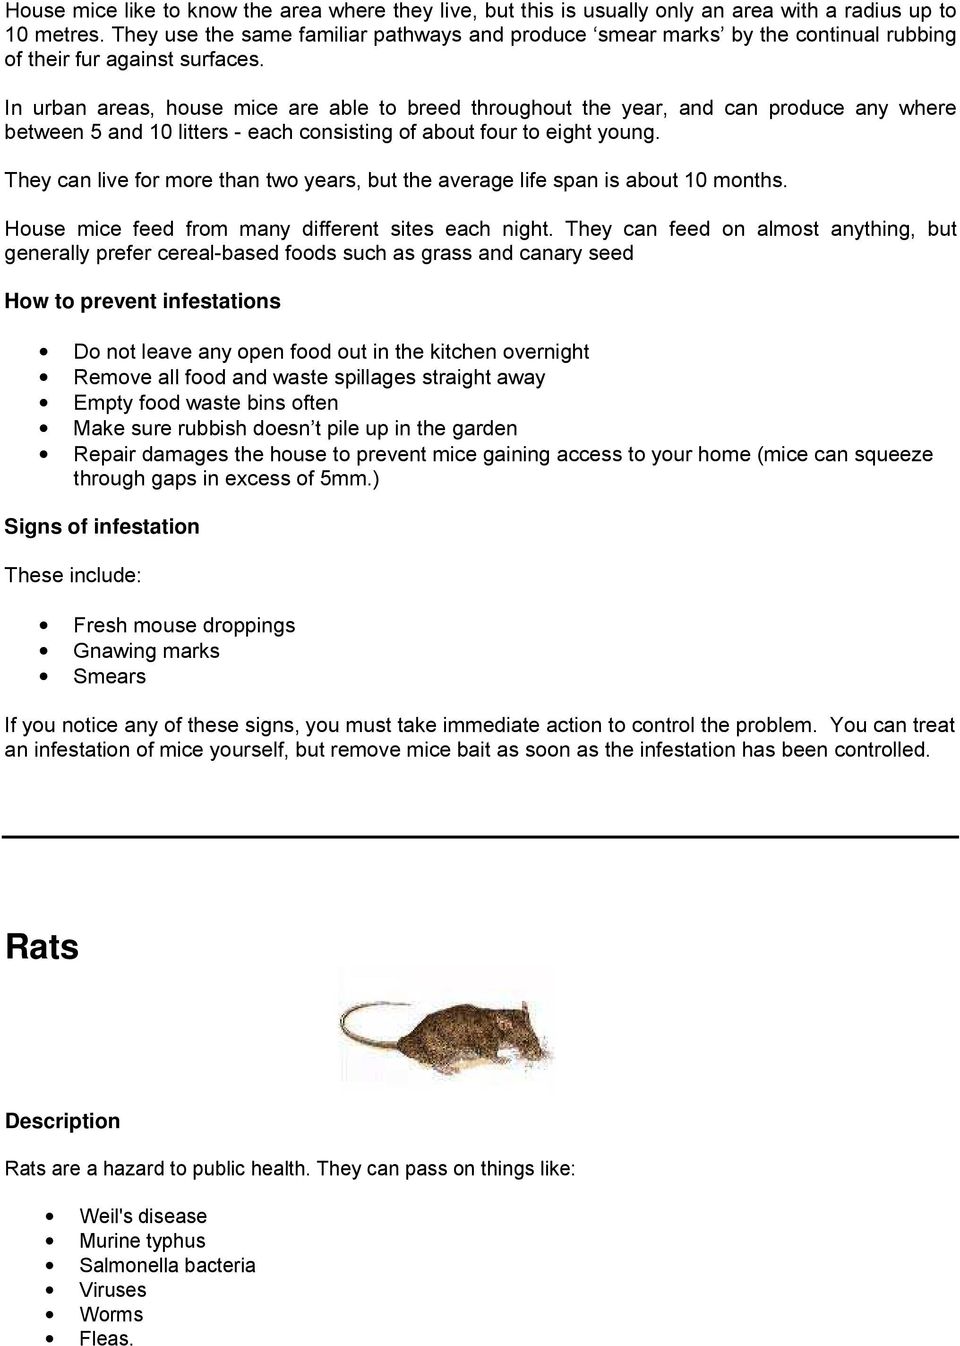 In urban areas, house mice are able to breed throughout the year, and can produce any where between 5 and 10 litters - each consisting of about four to eight young.